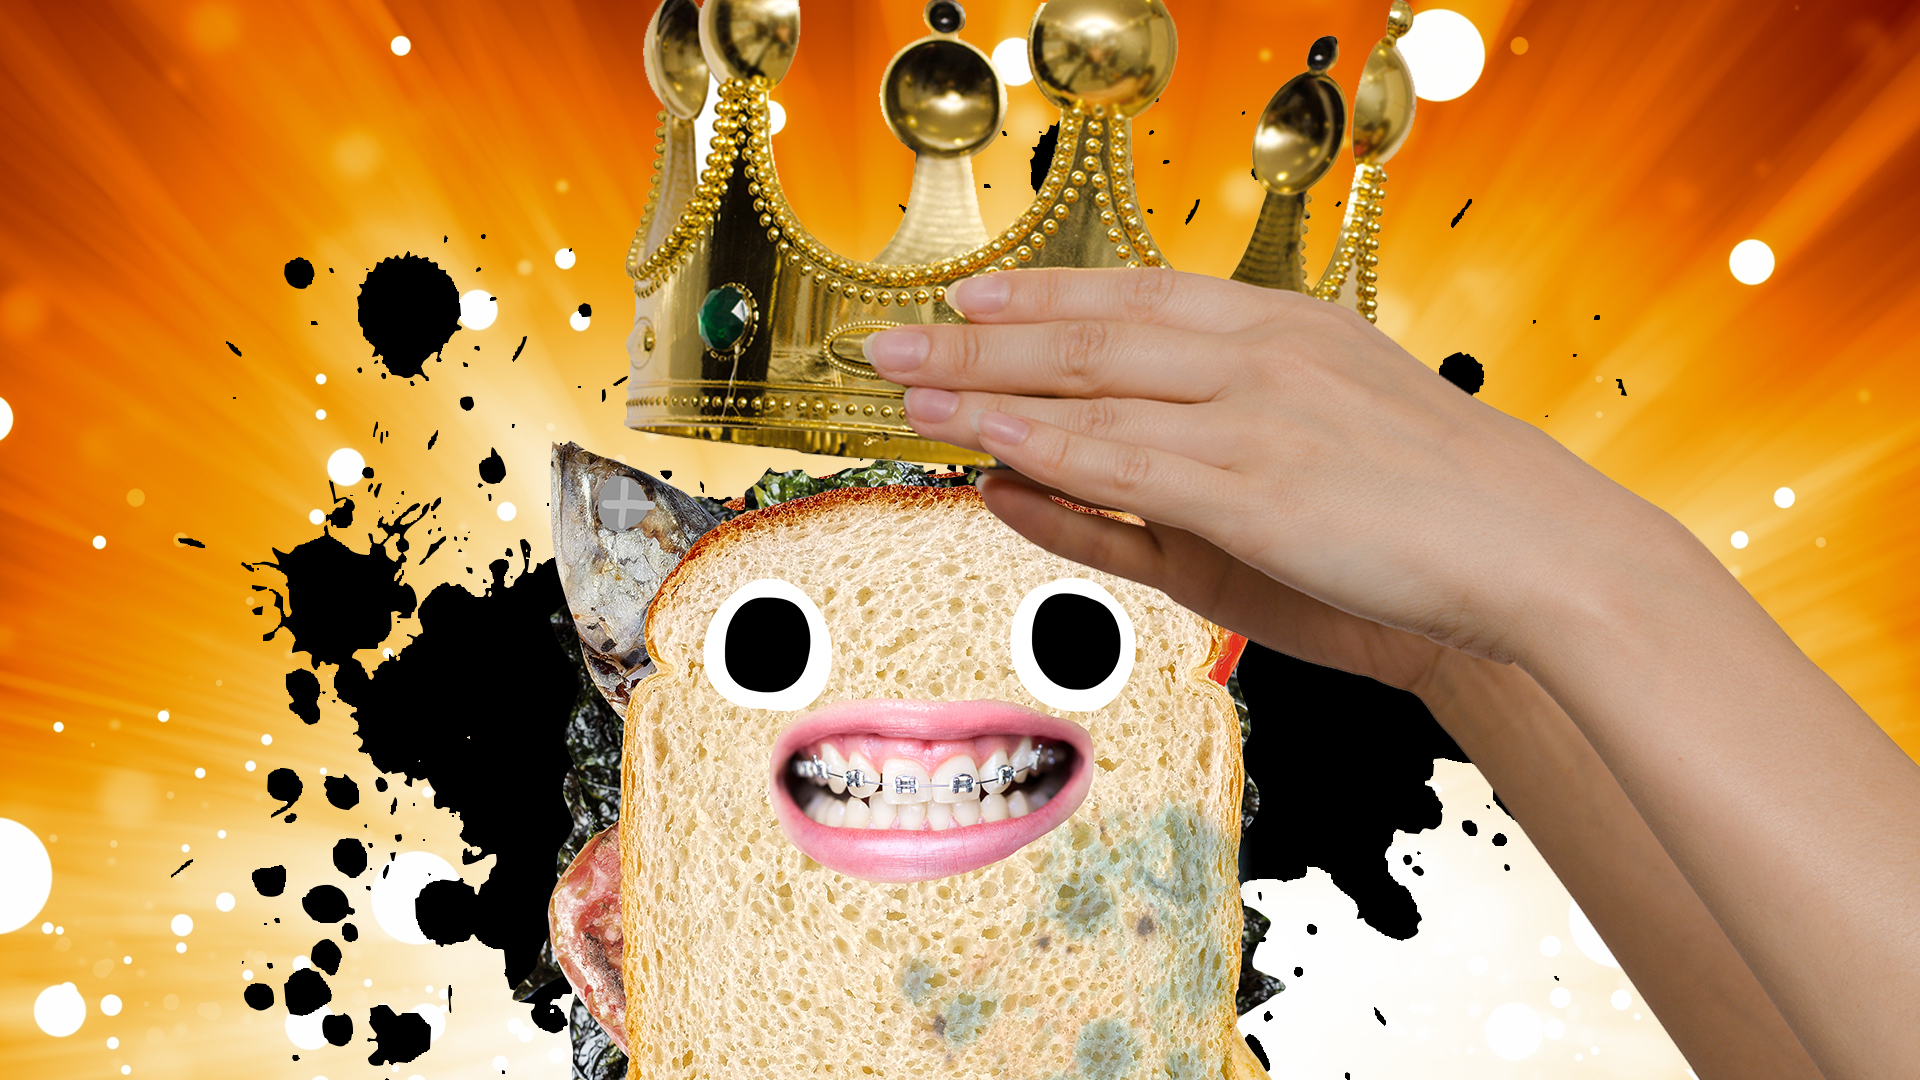 A mouldy sandwich is given a shiny hat